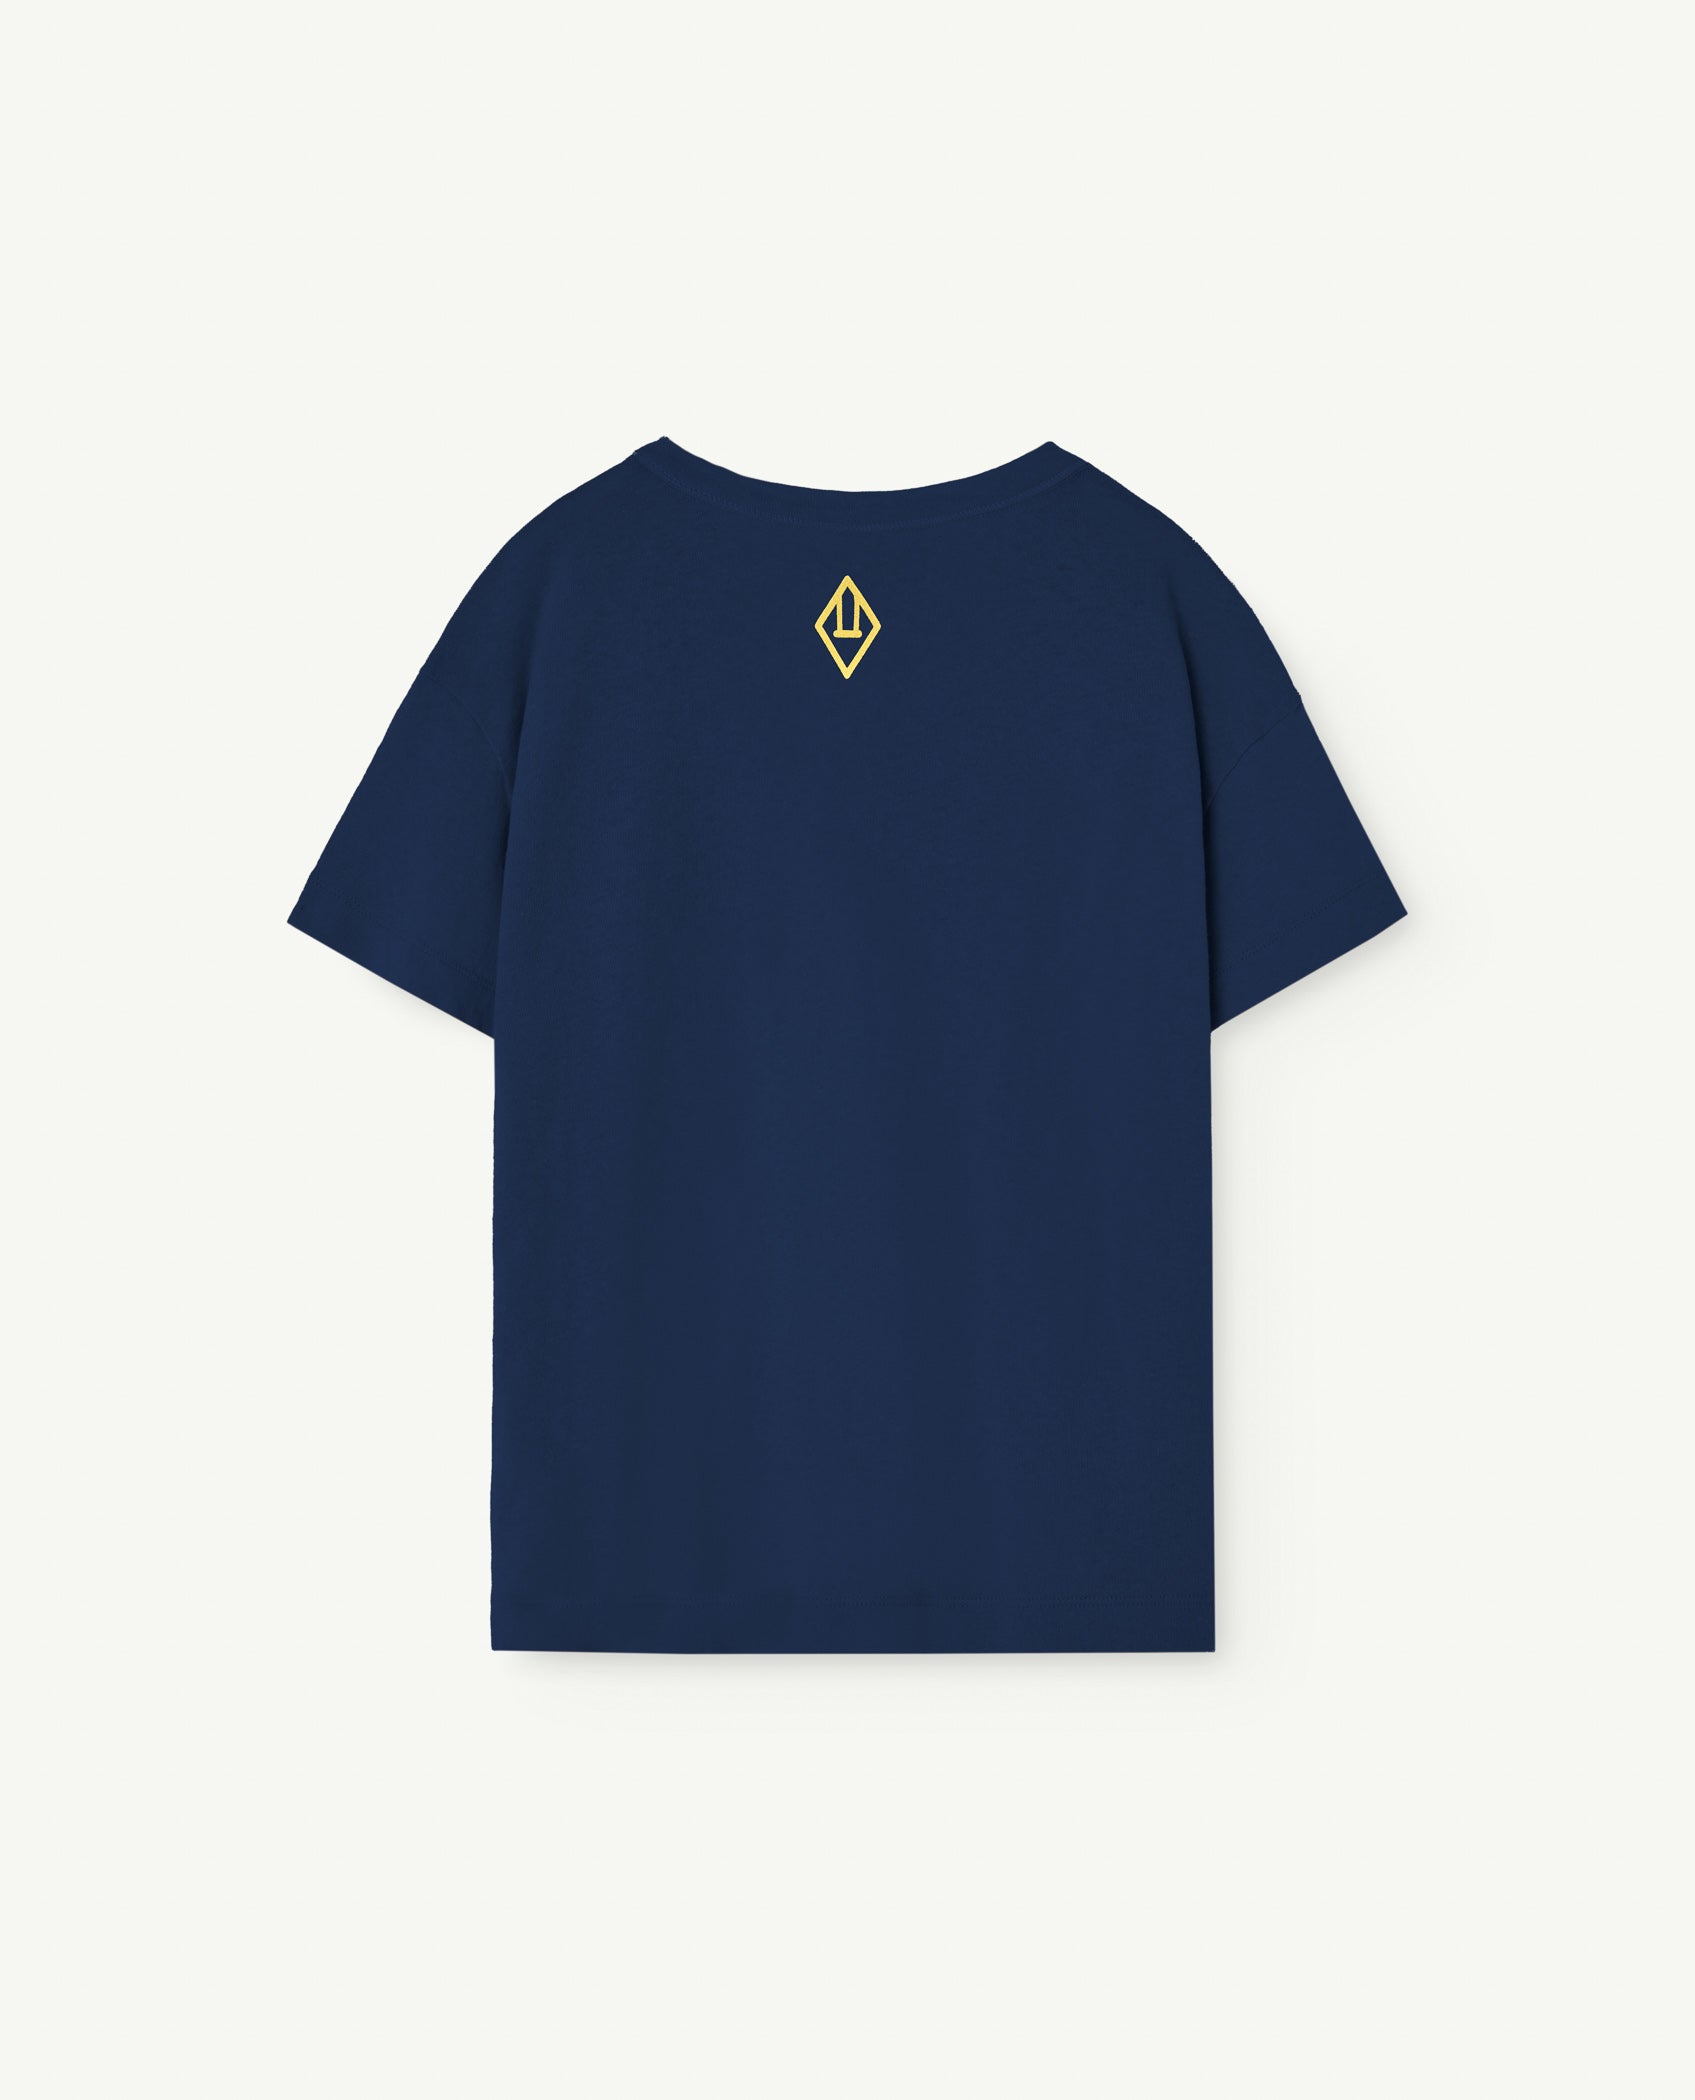 The Animals Observatory | Orion Kids T-Shirt- Navy